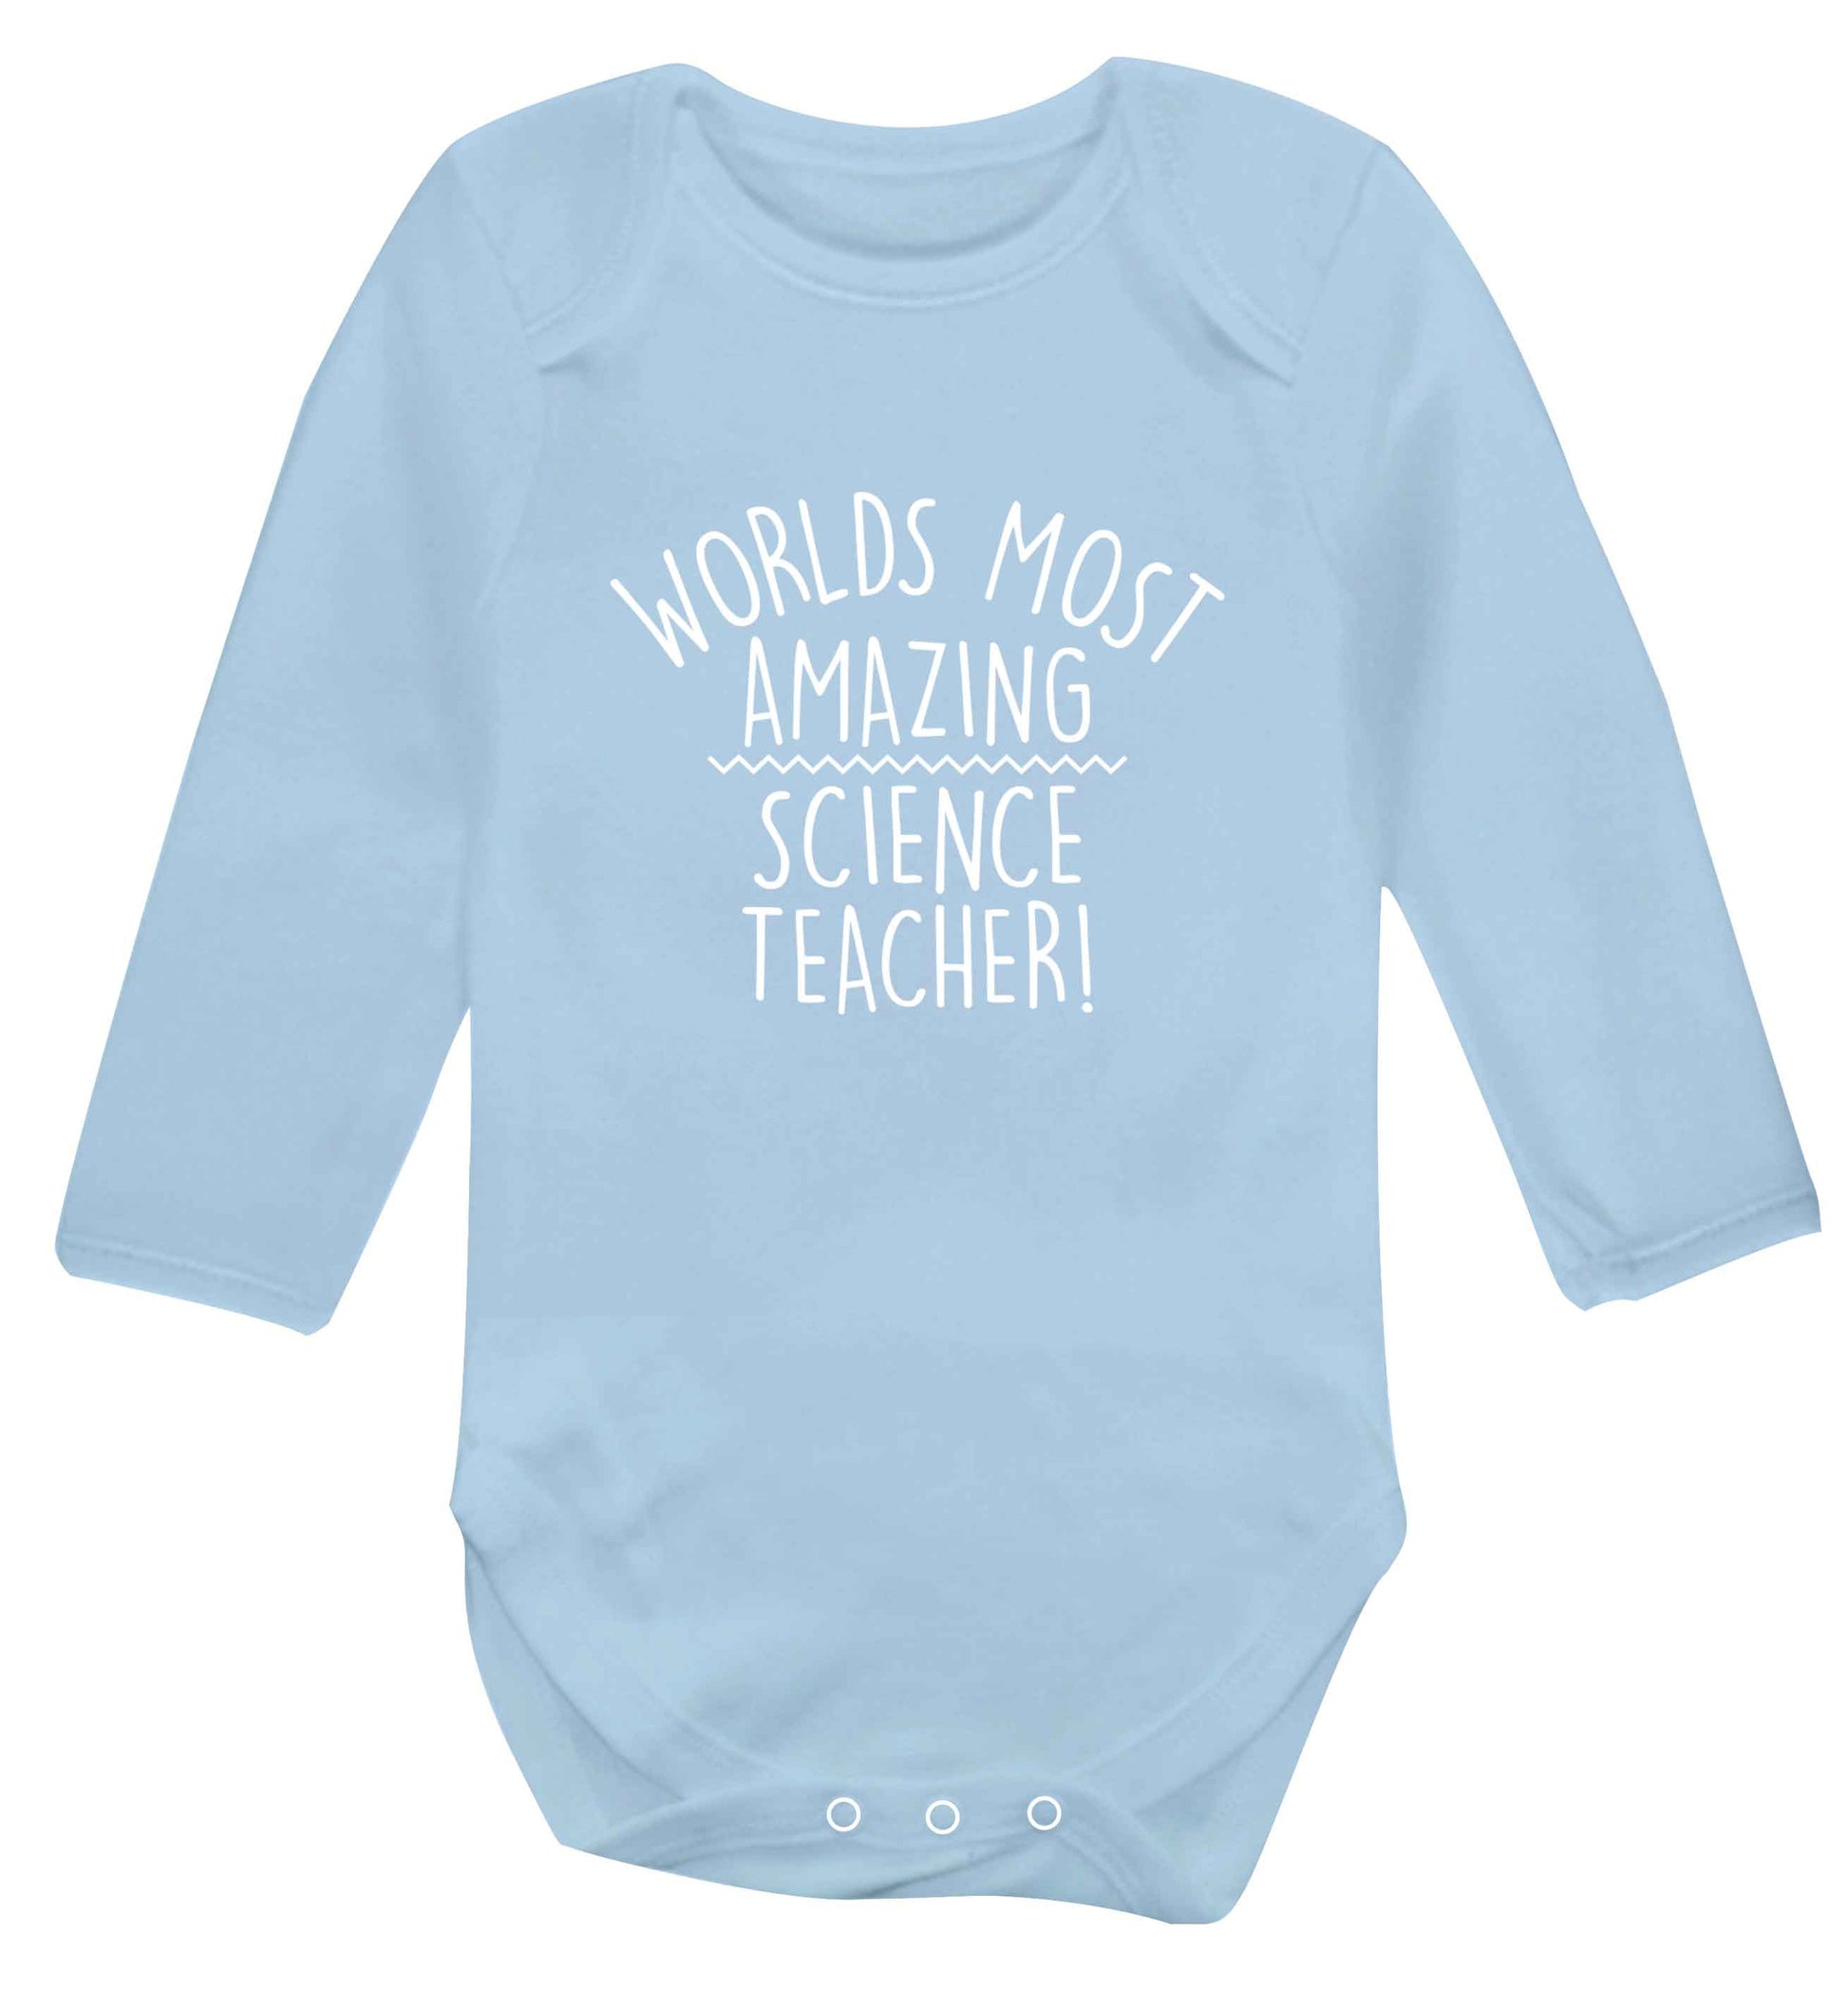 Worlds most amazing science teacher baby vest long sleeved pale blue 6-12 months